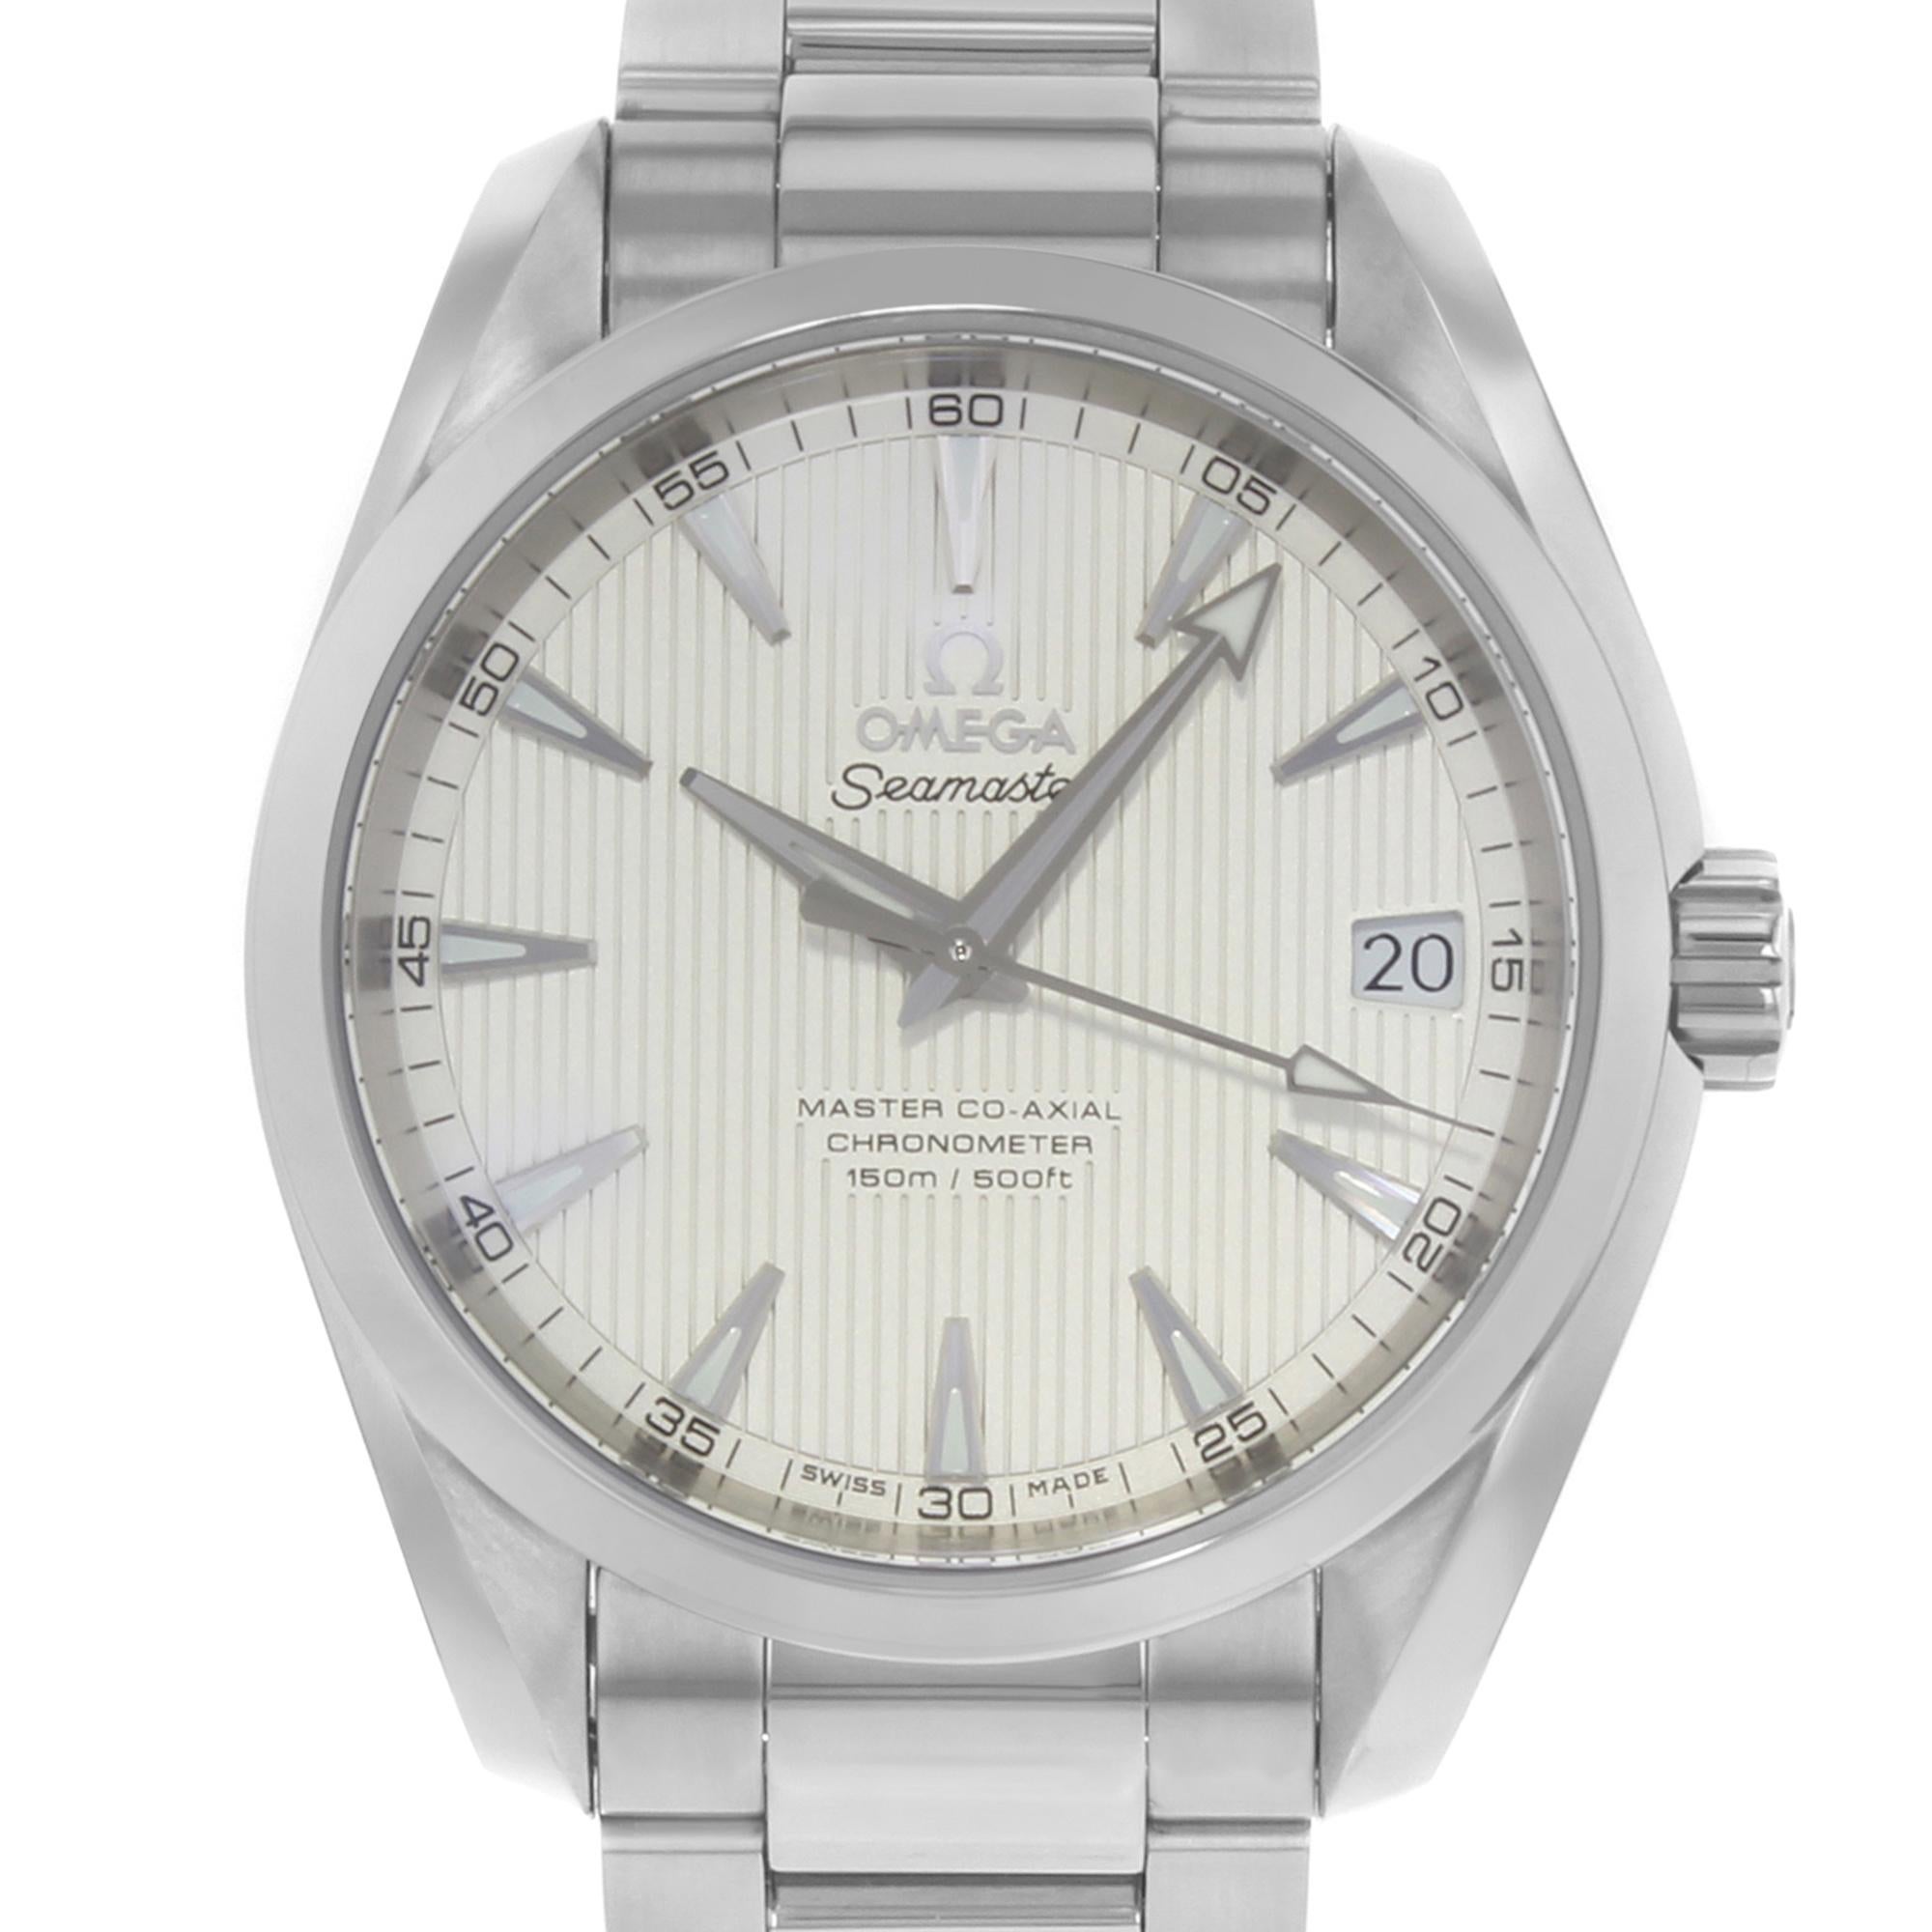 This brand new Omega Seamaster  231.10.39.21.02.002 is a beautiful men's timepiece that is powered by an automatic movement which is cased in a stainless steel case. It has a round shape face, date dial and has hand sticks style markers. It is